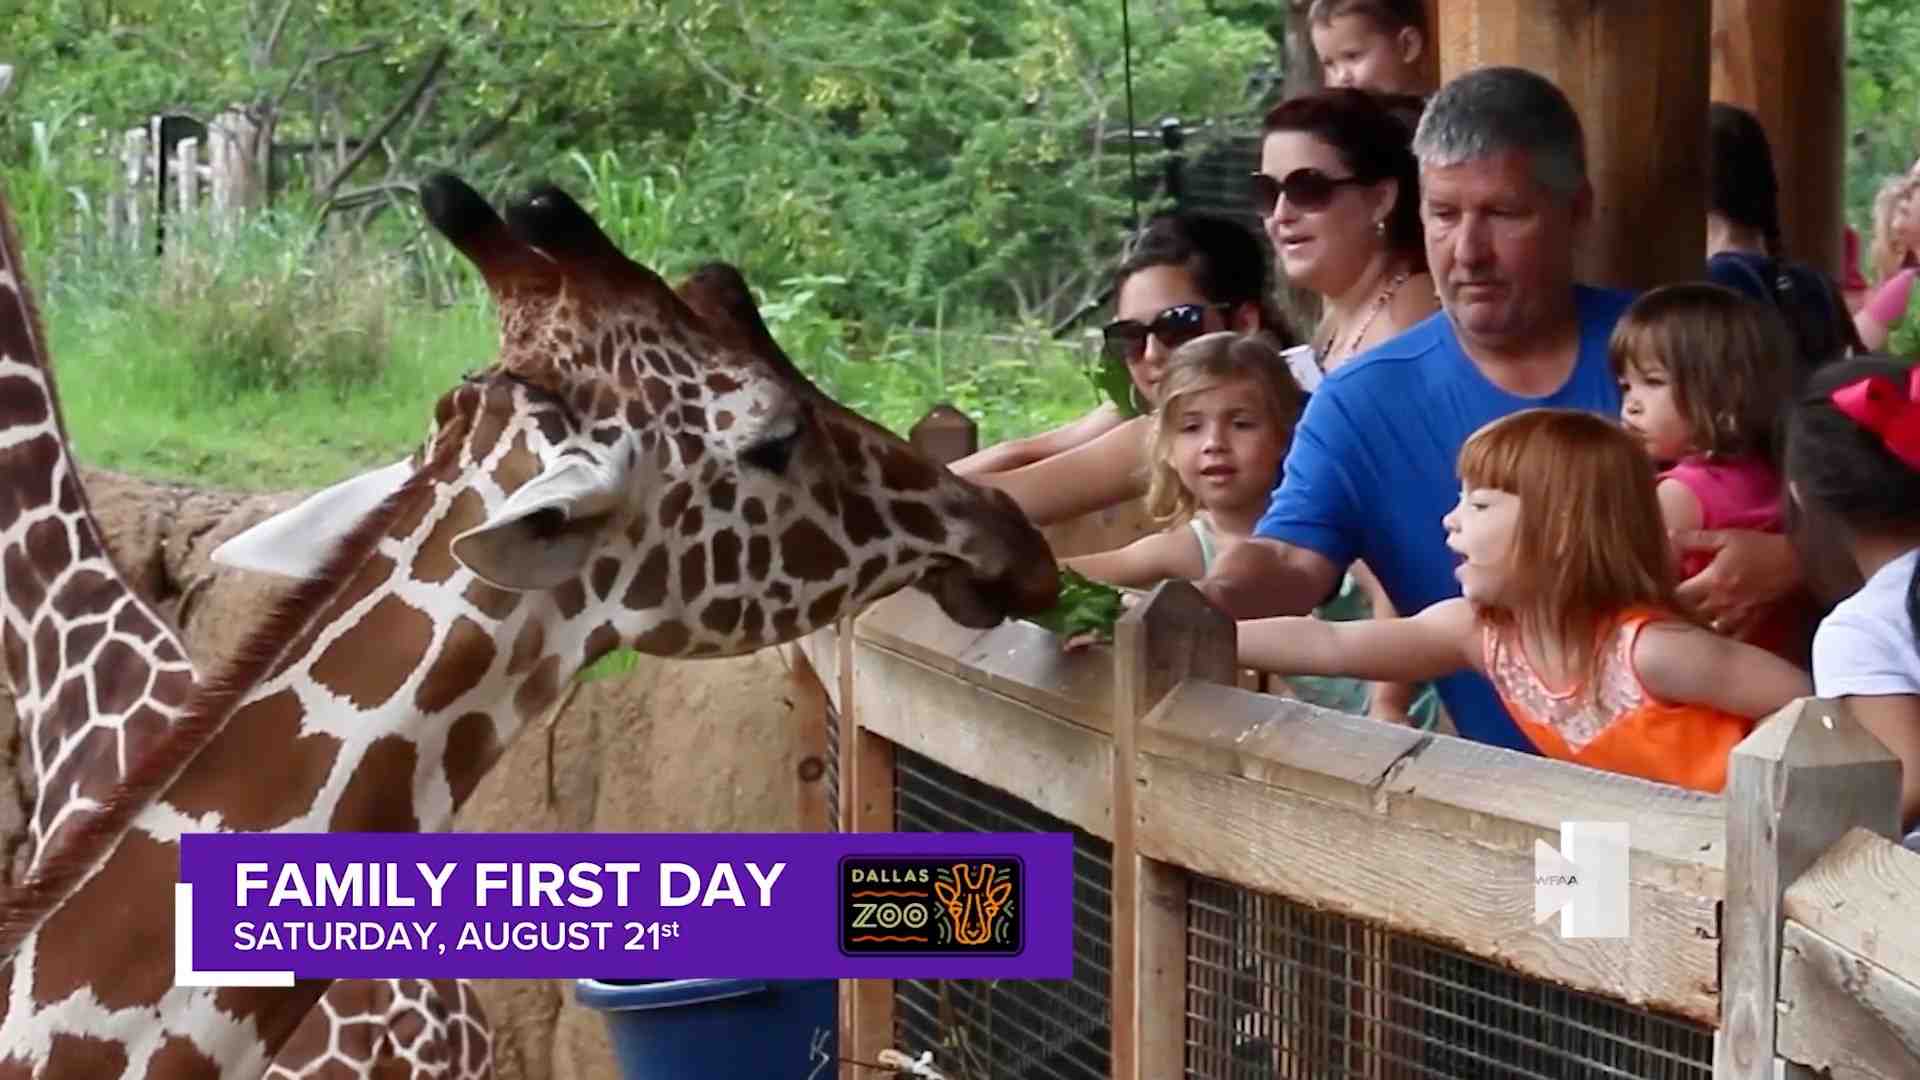 How does the Dallas Zoo rank?